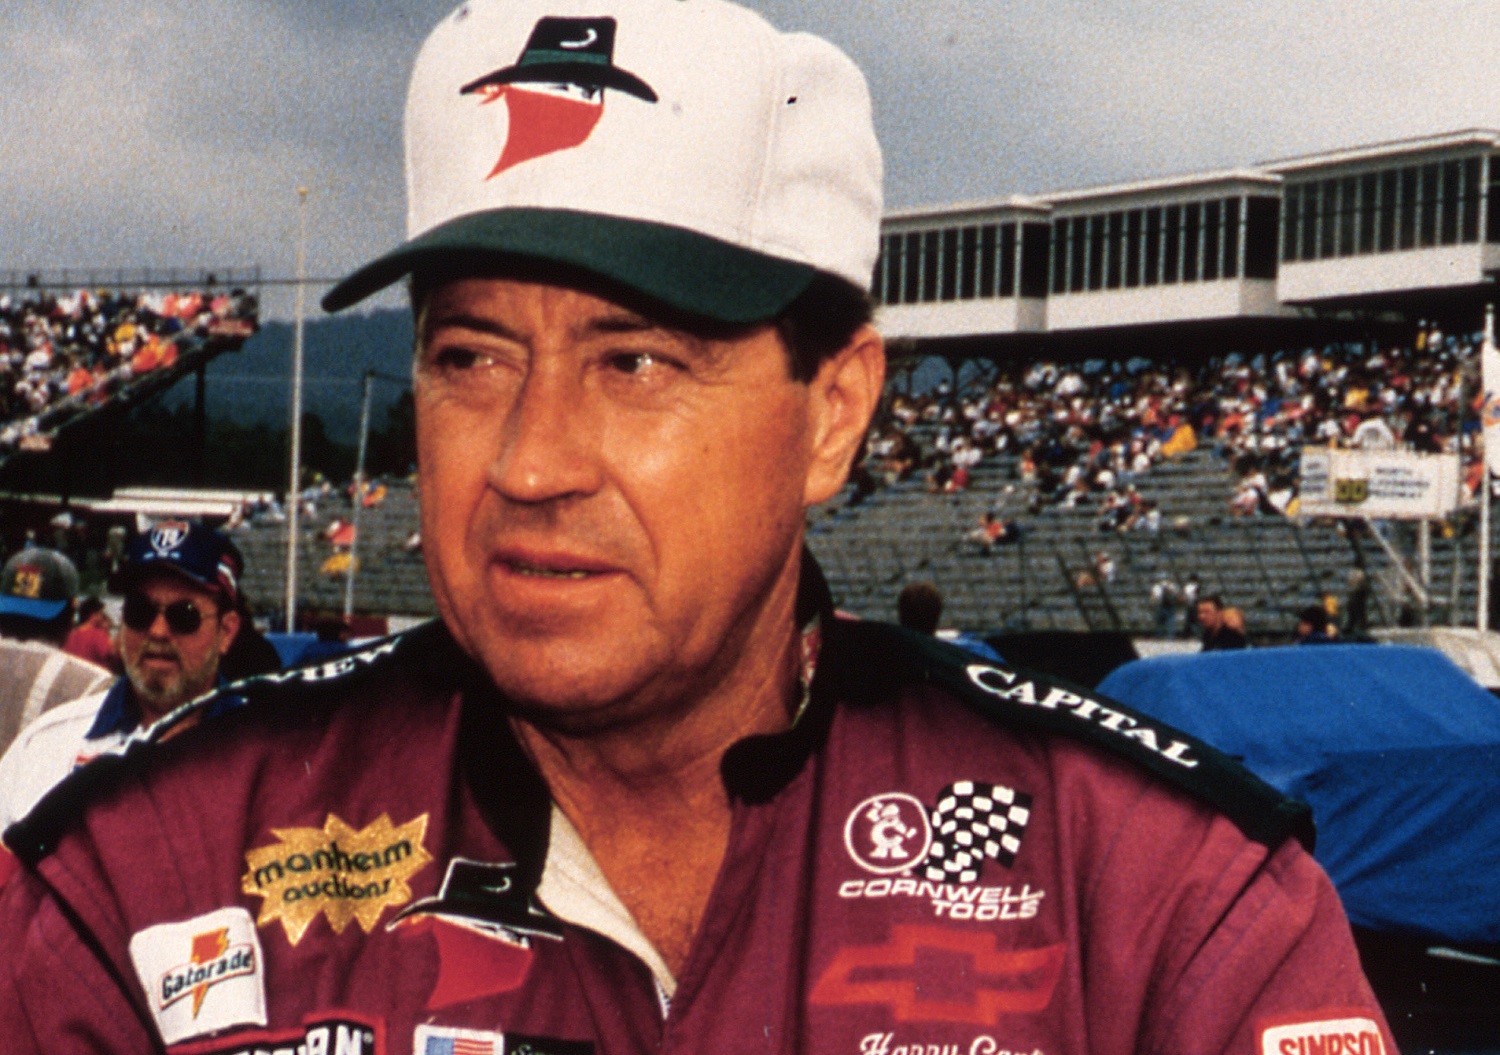 Harry Gant electrified NASCAR by winning four straight Cup Series races in 1991 at the age of 51, inspiring his 'Mr. September' nickname. | ISC Images & Archives via Getty Images